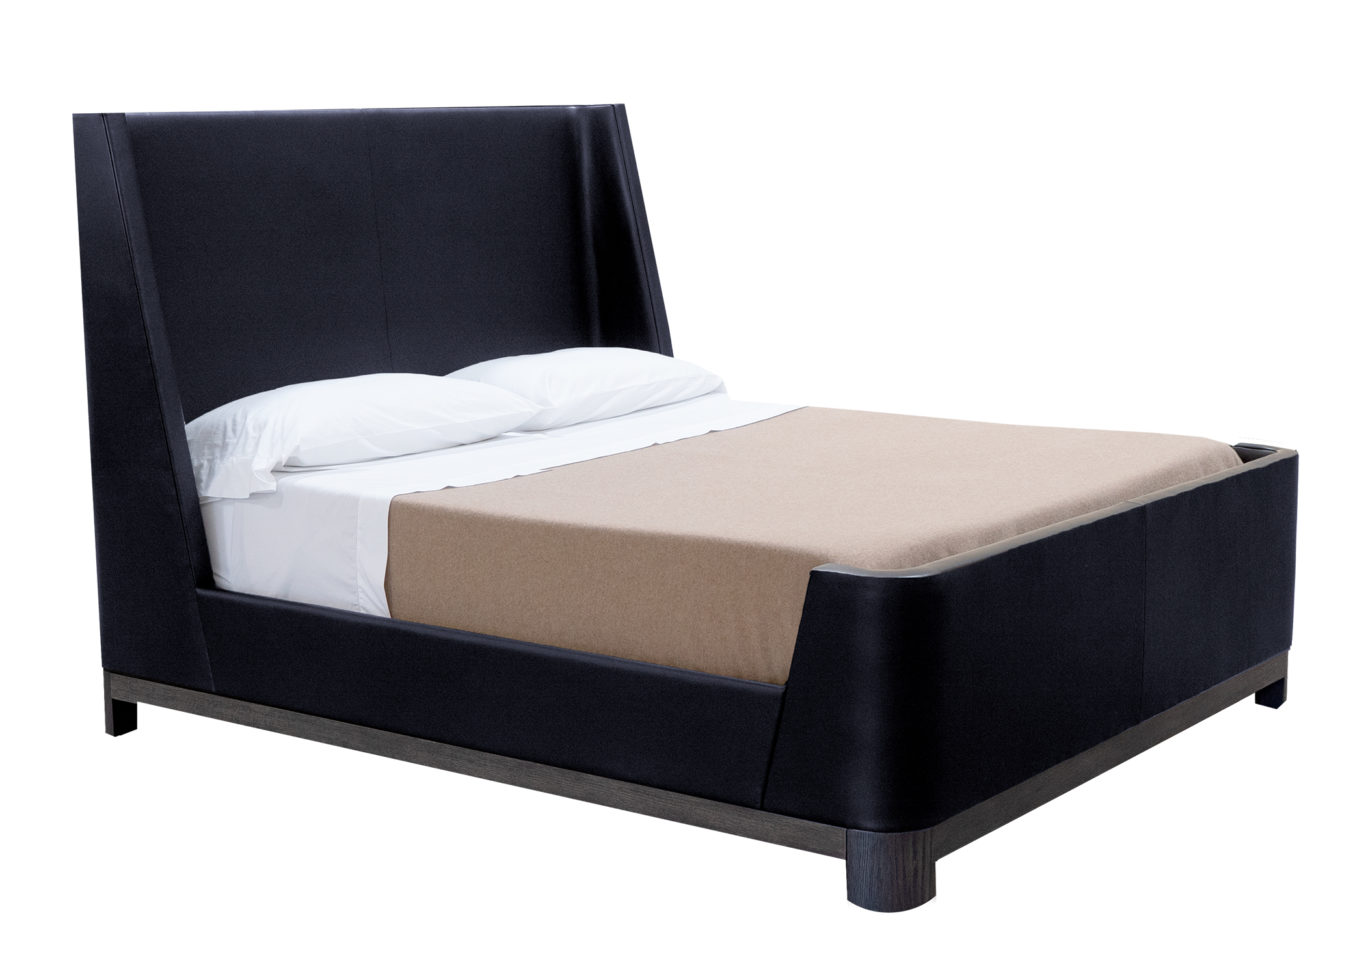 Beds & Headboards Product: 2729